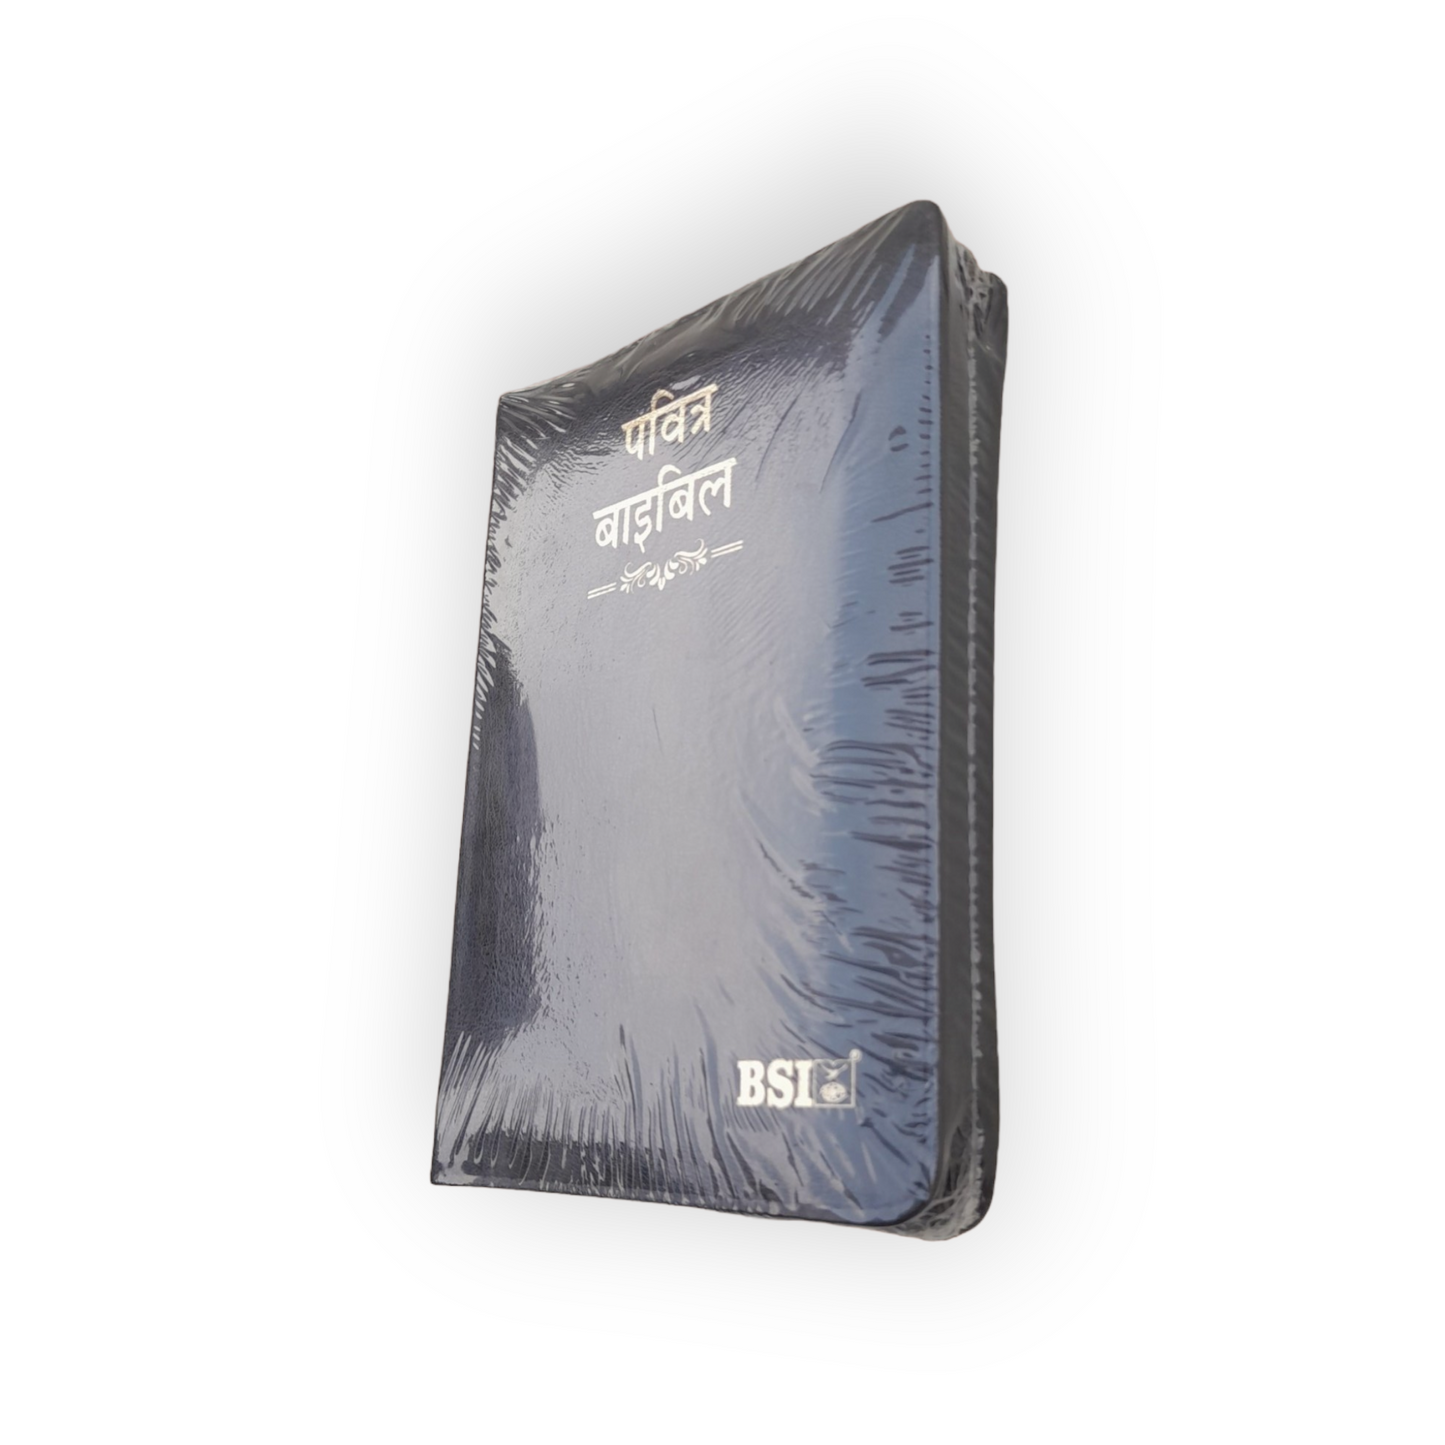 KBS Hindi Bible | With Thumb Index | Korean Printed Edition | In Black Color | With Zip